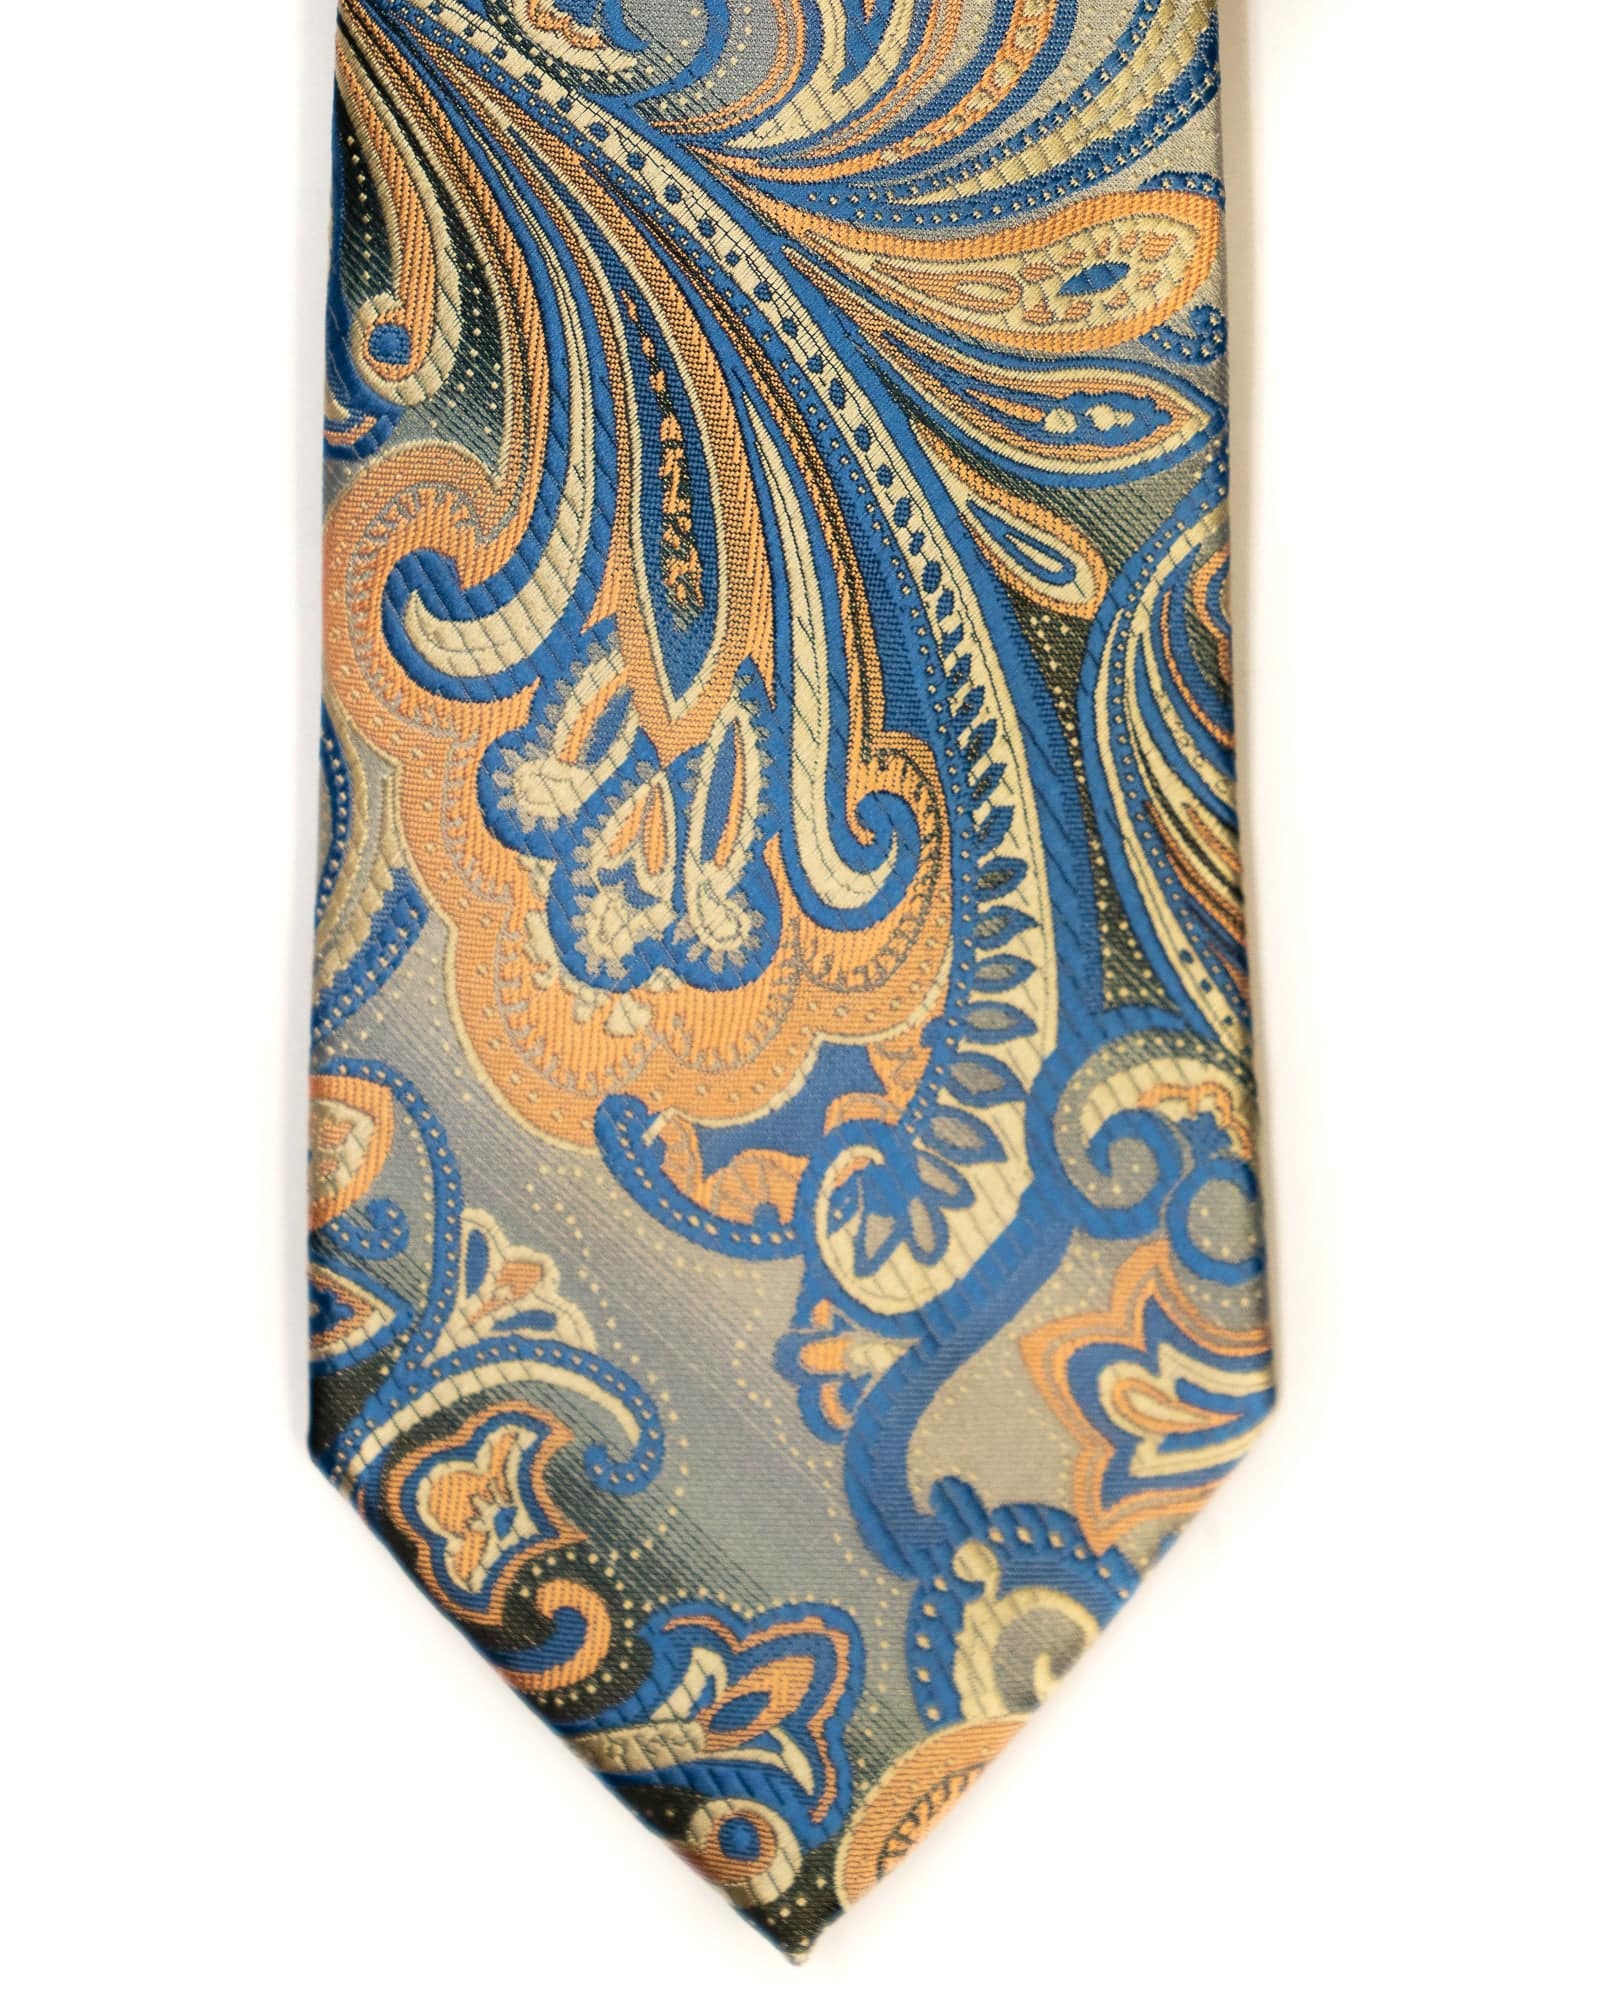 Venturi Uomo Exploded Paisley Tie in Grey with Coral - Rainwater's Men's Clothing and Tuxedo Rental